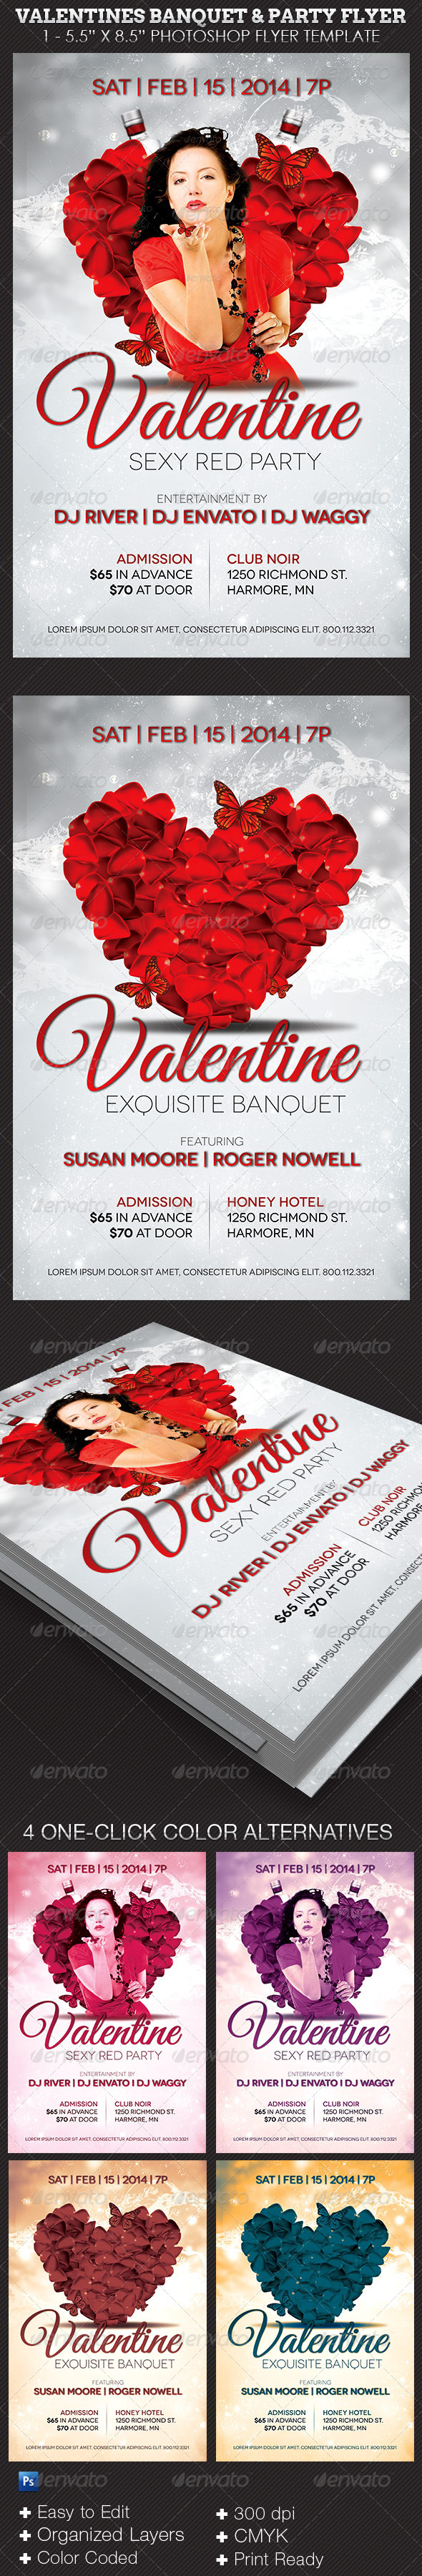 Valentines Banquet and Party Flyer Template